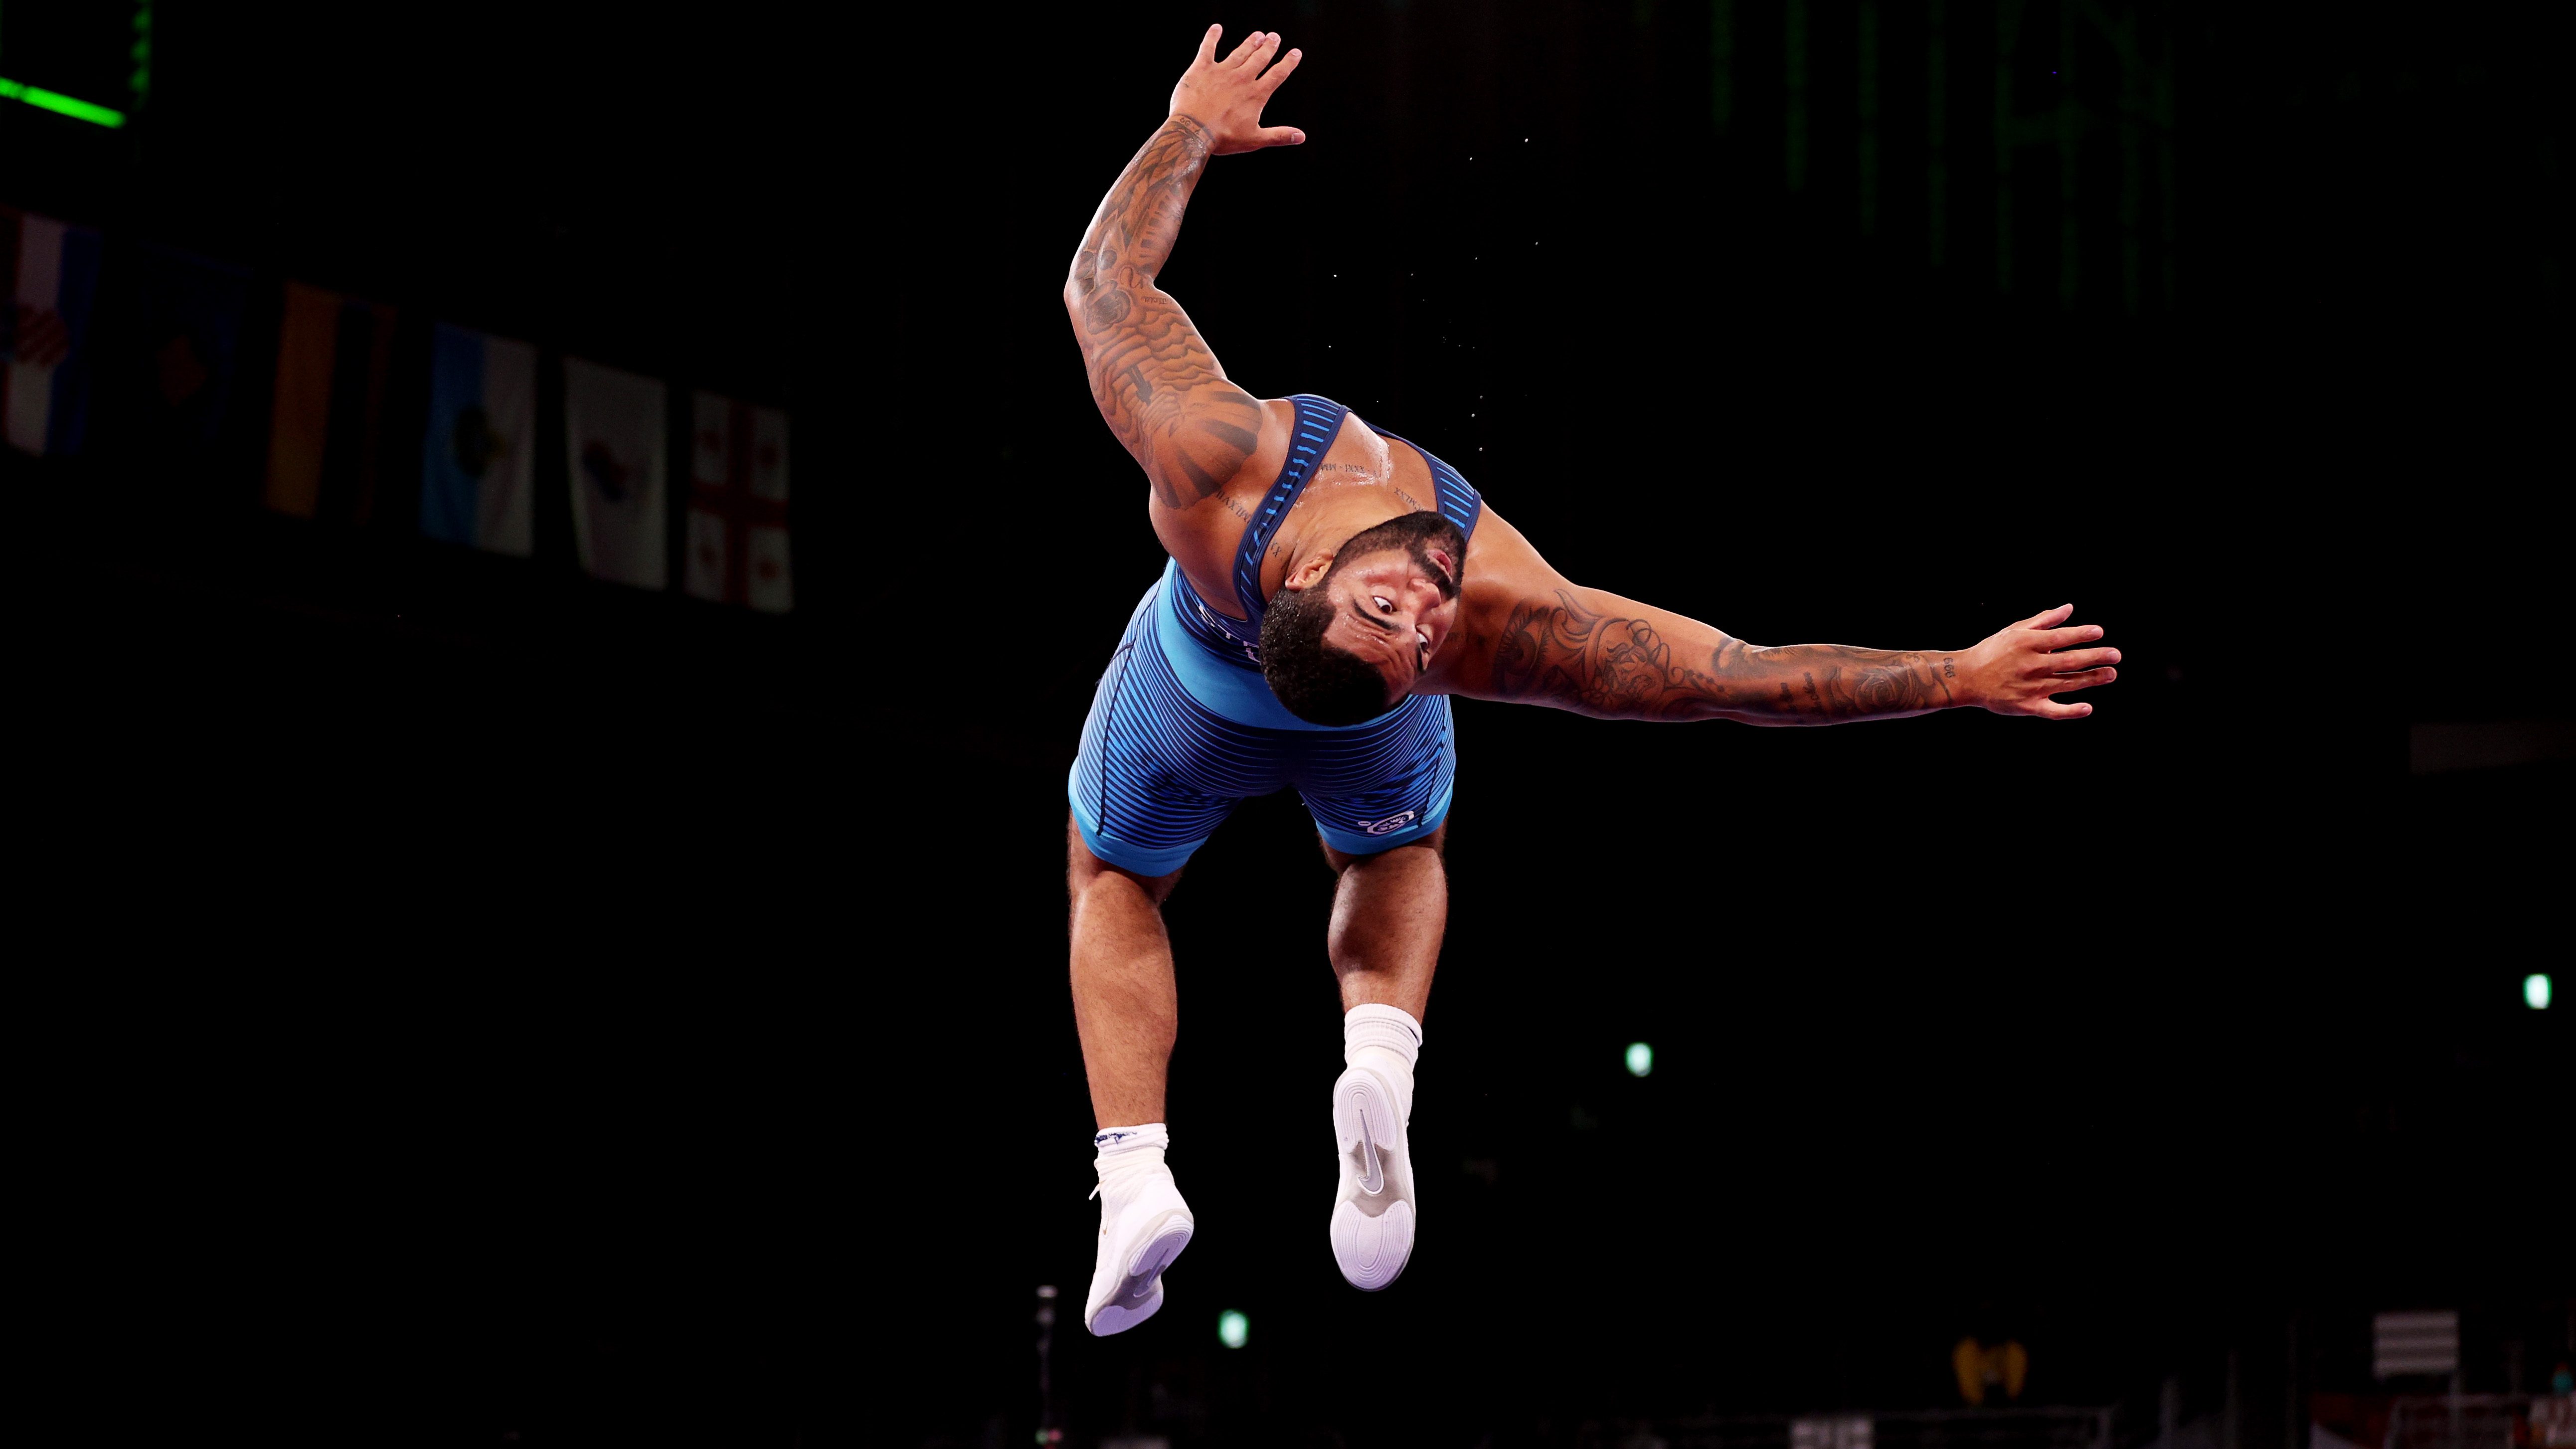 US wrestler Gable Steveson wins gold in last second of freestyle match, celebrates with signature backflip